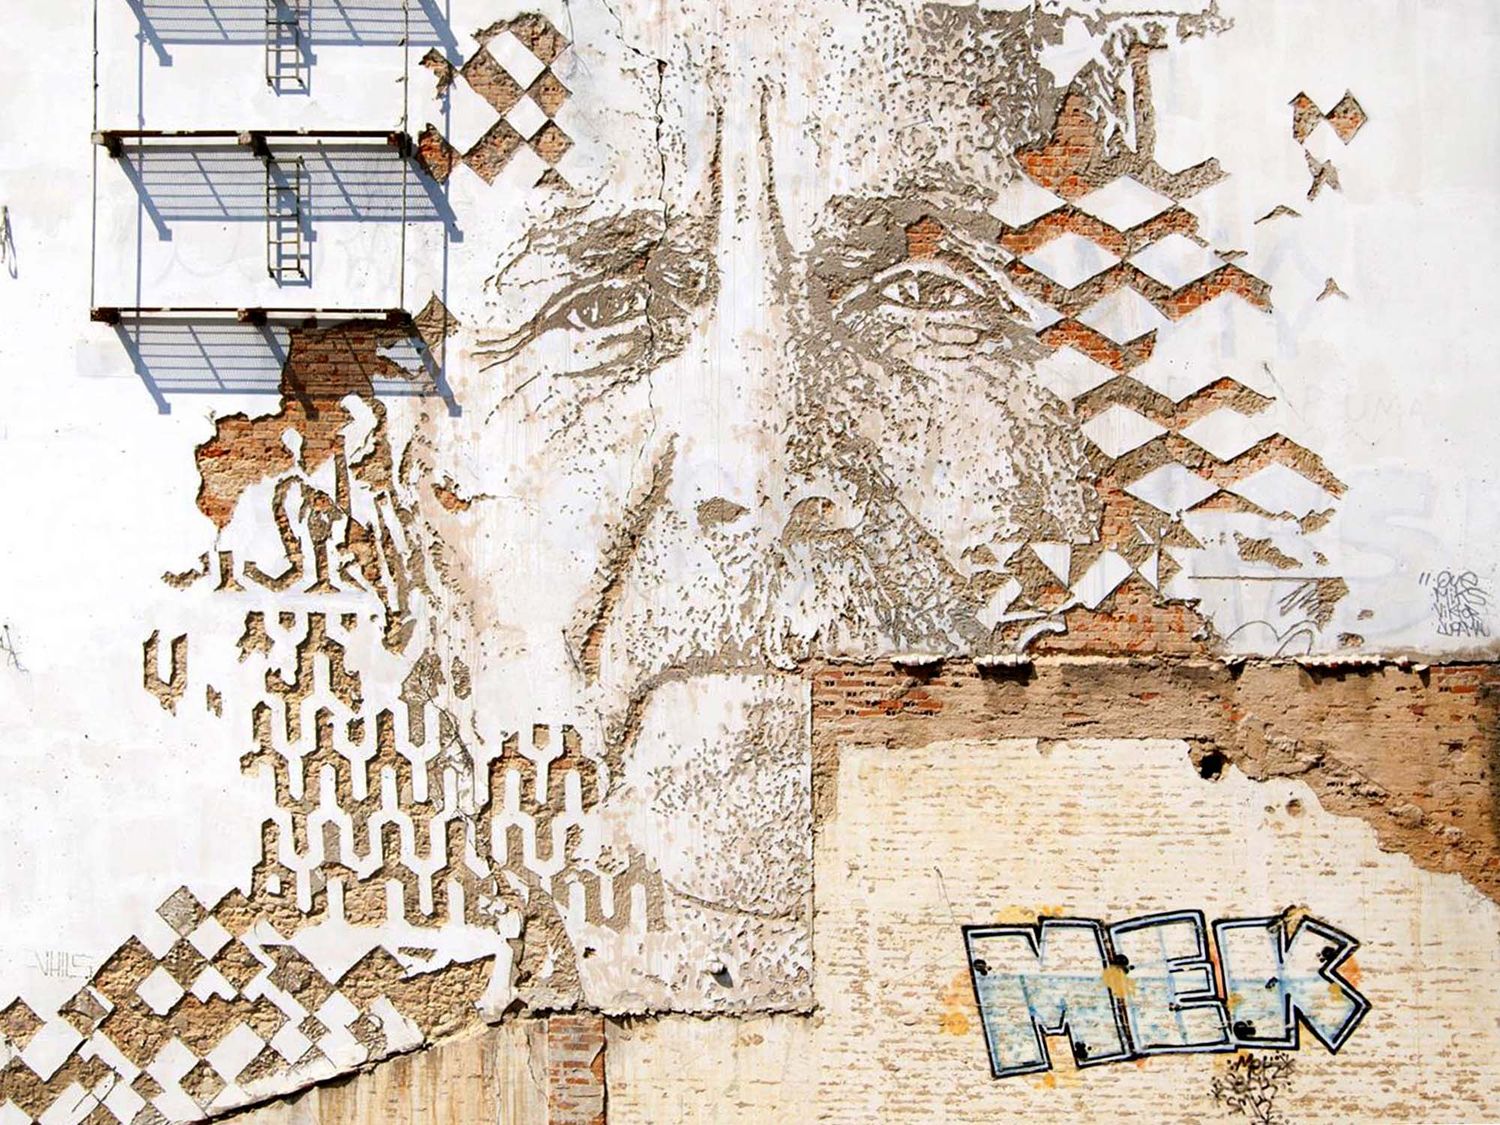 Originally from Lisbon, Alexandre Farto aka Vhils uses his technique to bring life to walls, he removes to better reveal. Here in Alcantara as part of the exhibition "Dissection" (©Stick2target).